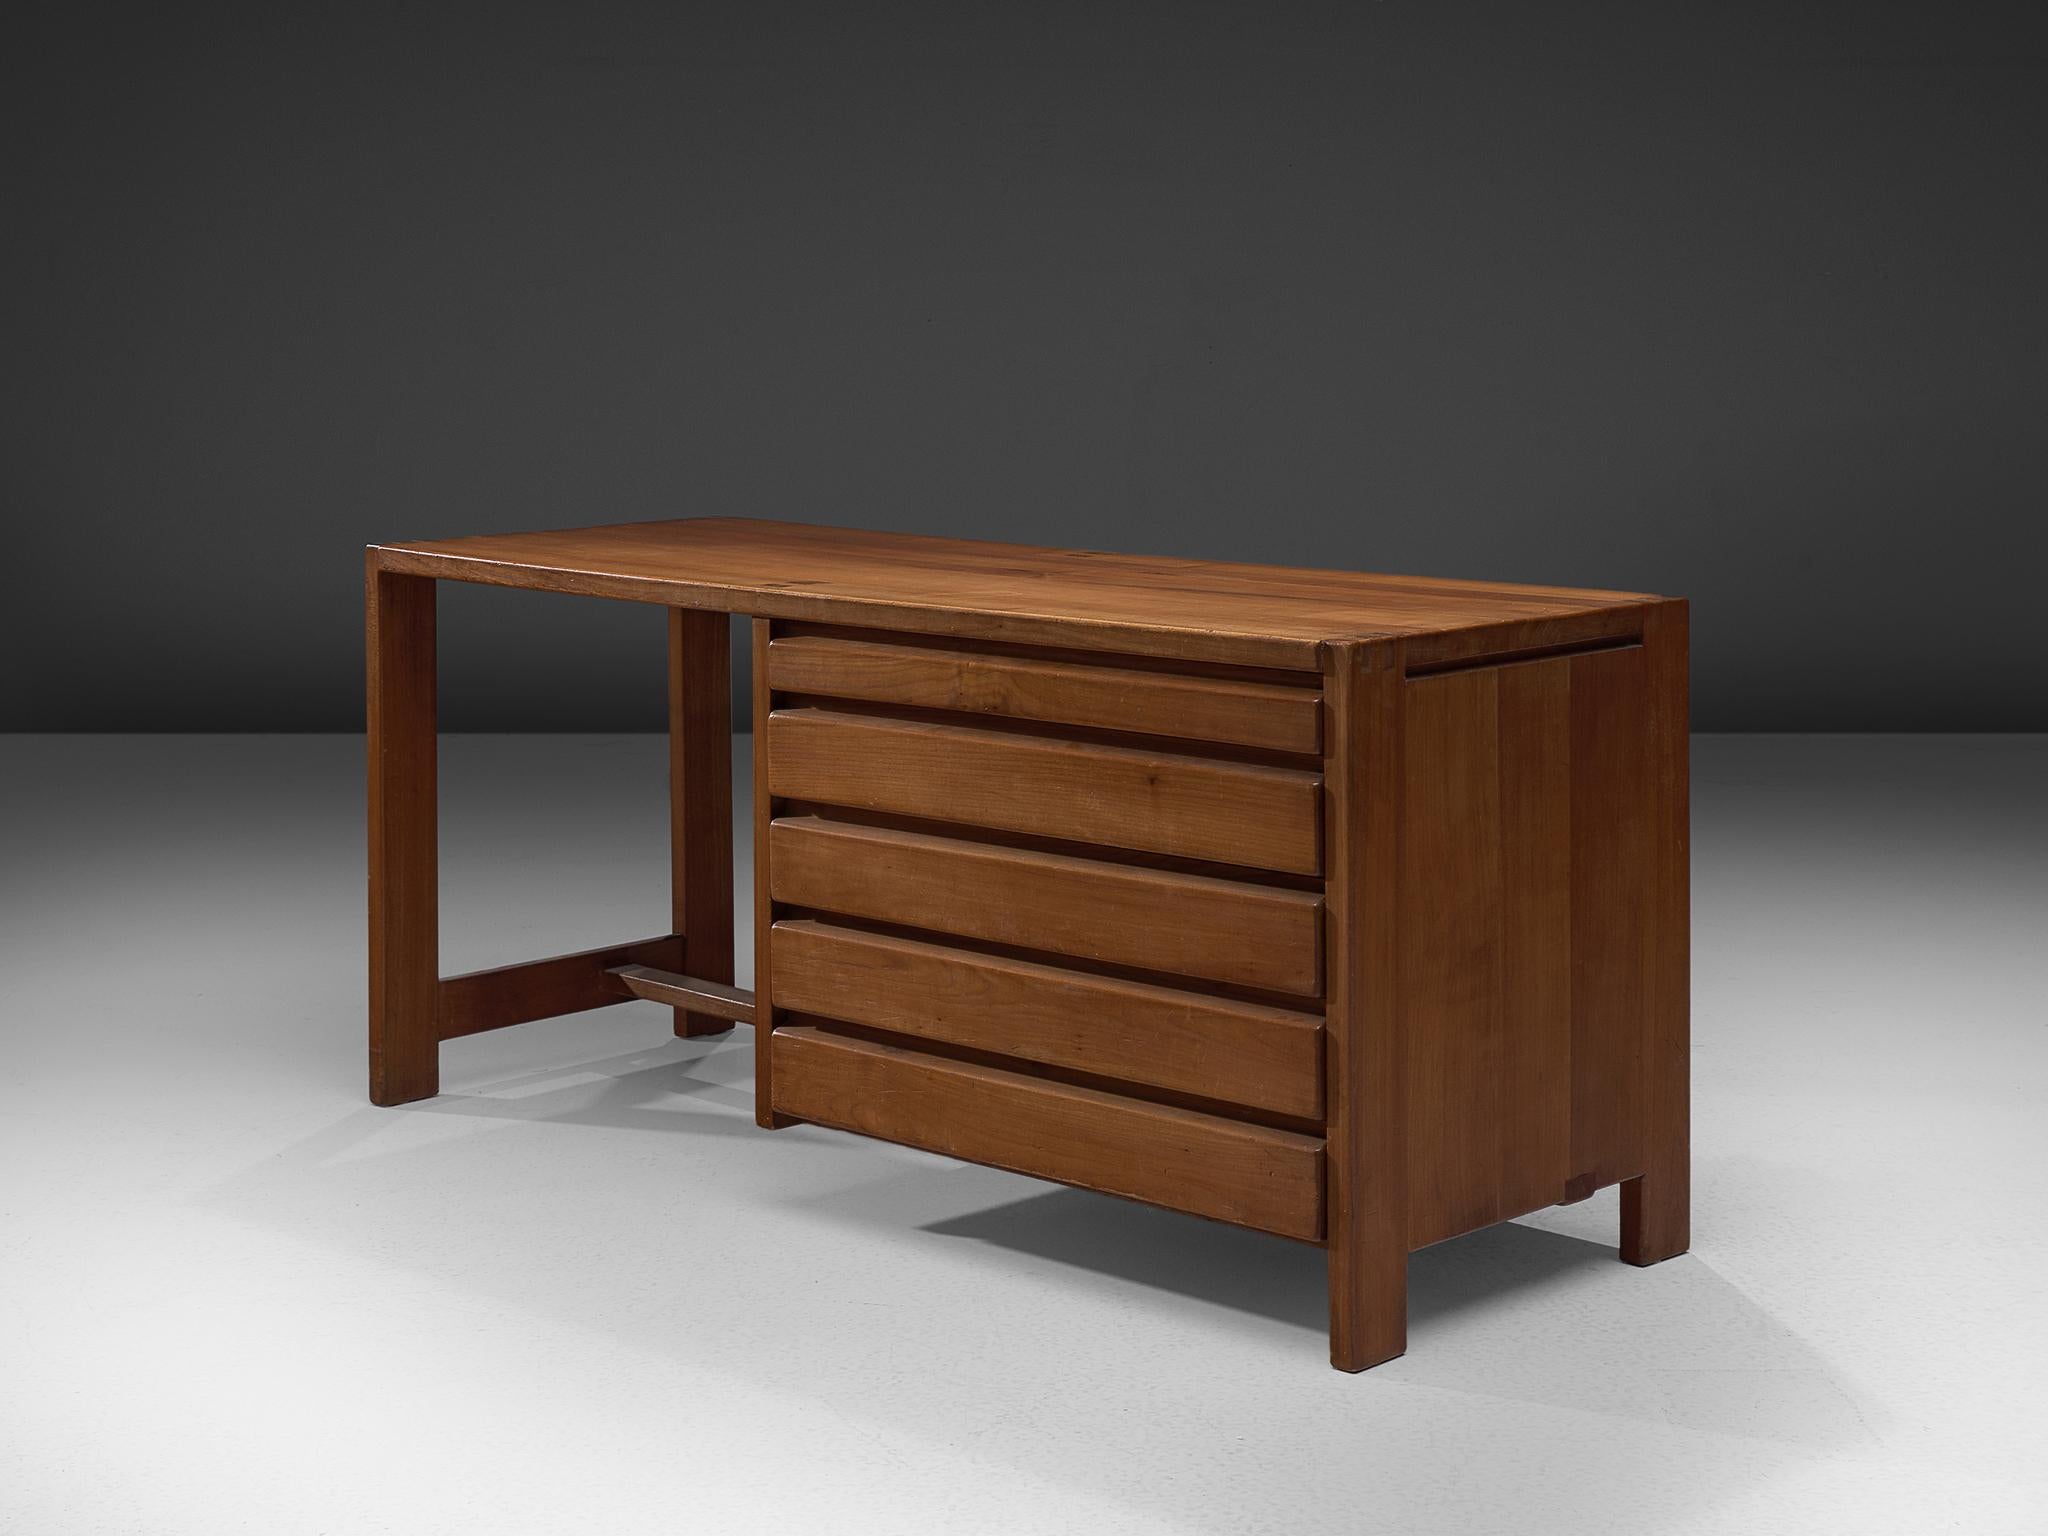 Pierre Chapo, dressing table model 'R05', elm, circa 1960

This design is an early edition, created according to the original craft methodology of Pierre Chapo. This exquisitely crafted table with drawers combines a simplified yet complex design